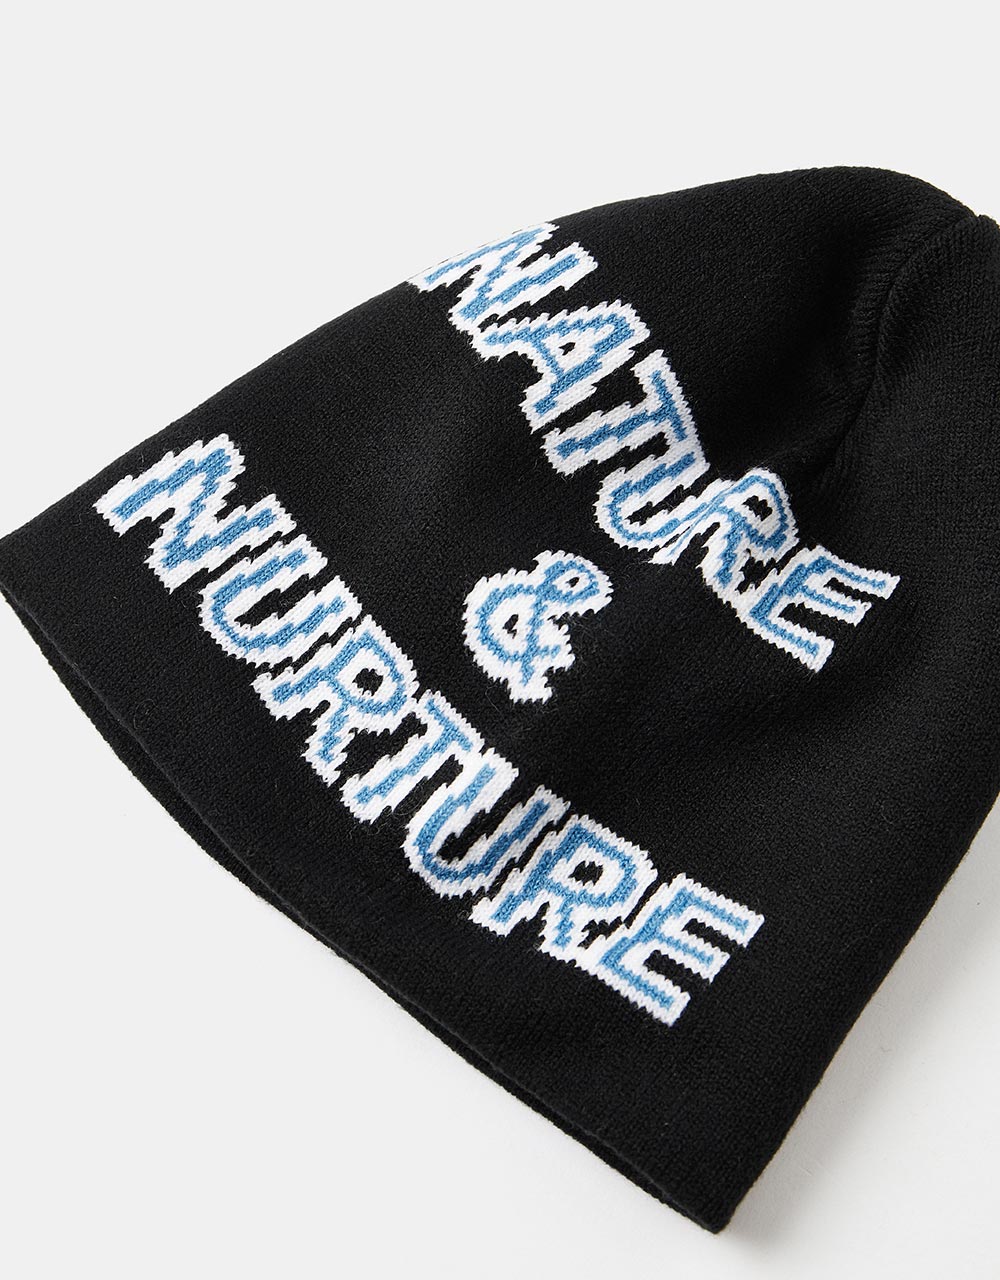 Obey Nature And Nuture Beanie - Black